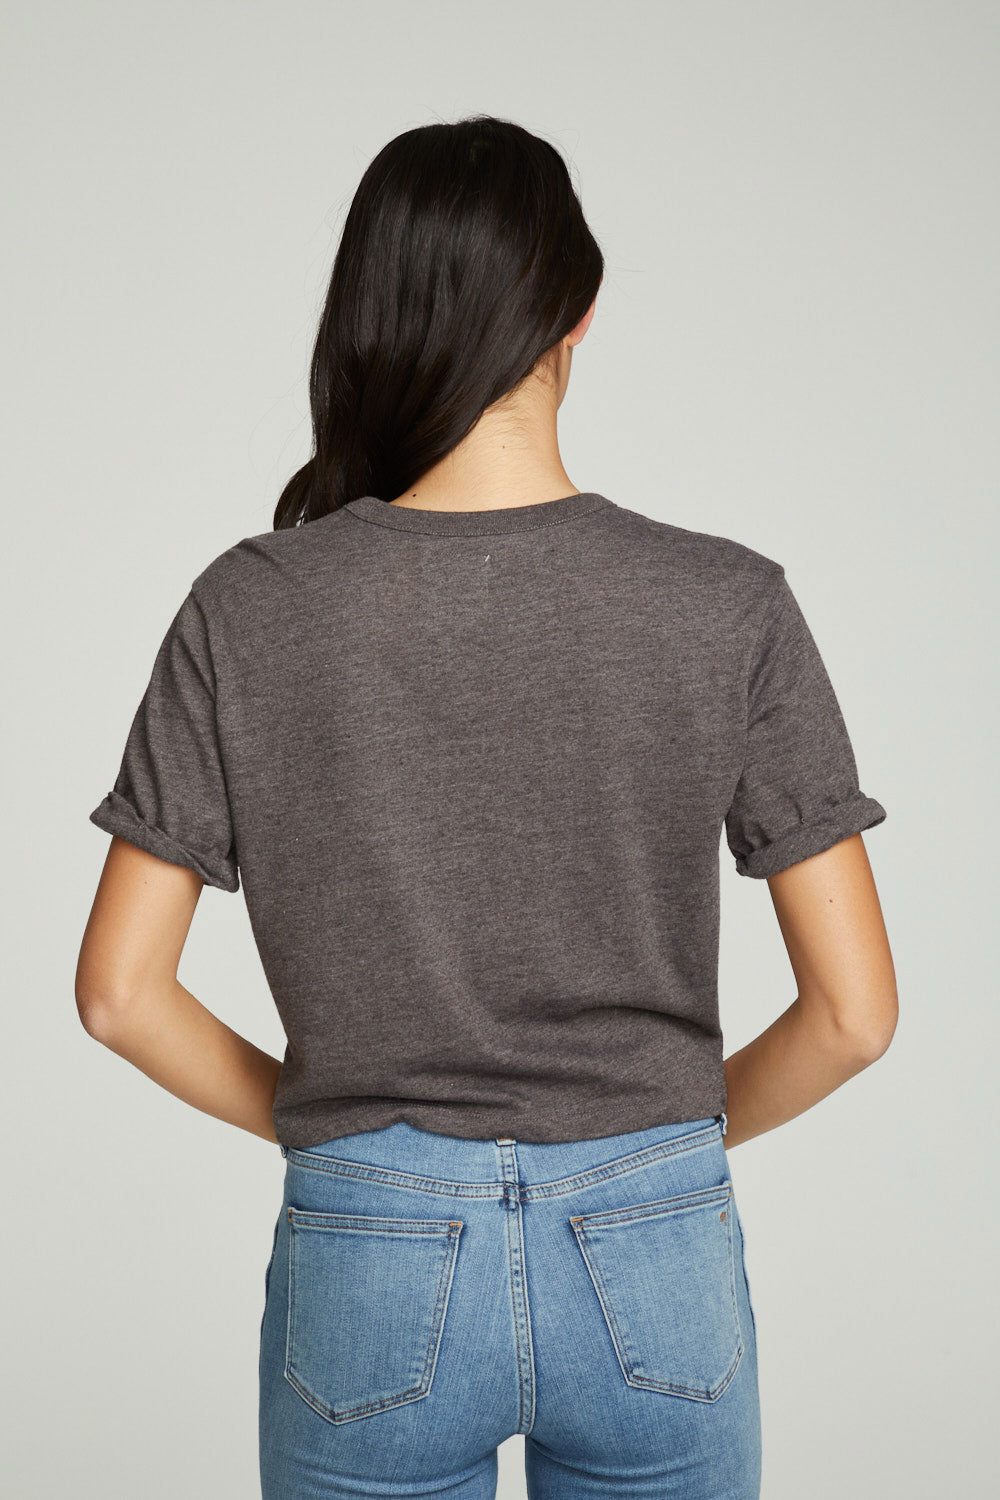 Cropped Crew Neck Short Sleeve Tee WOMENS chaserbrand